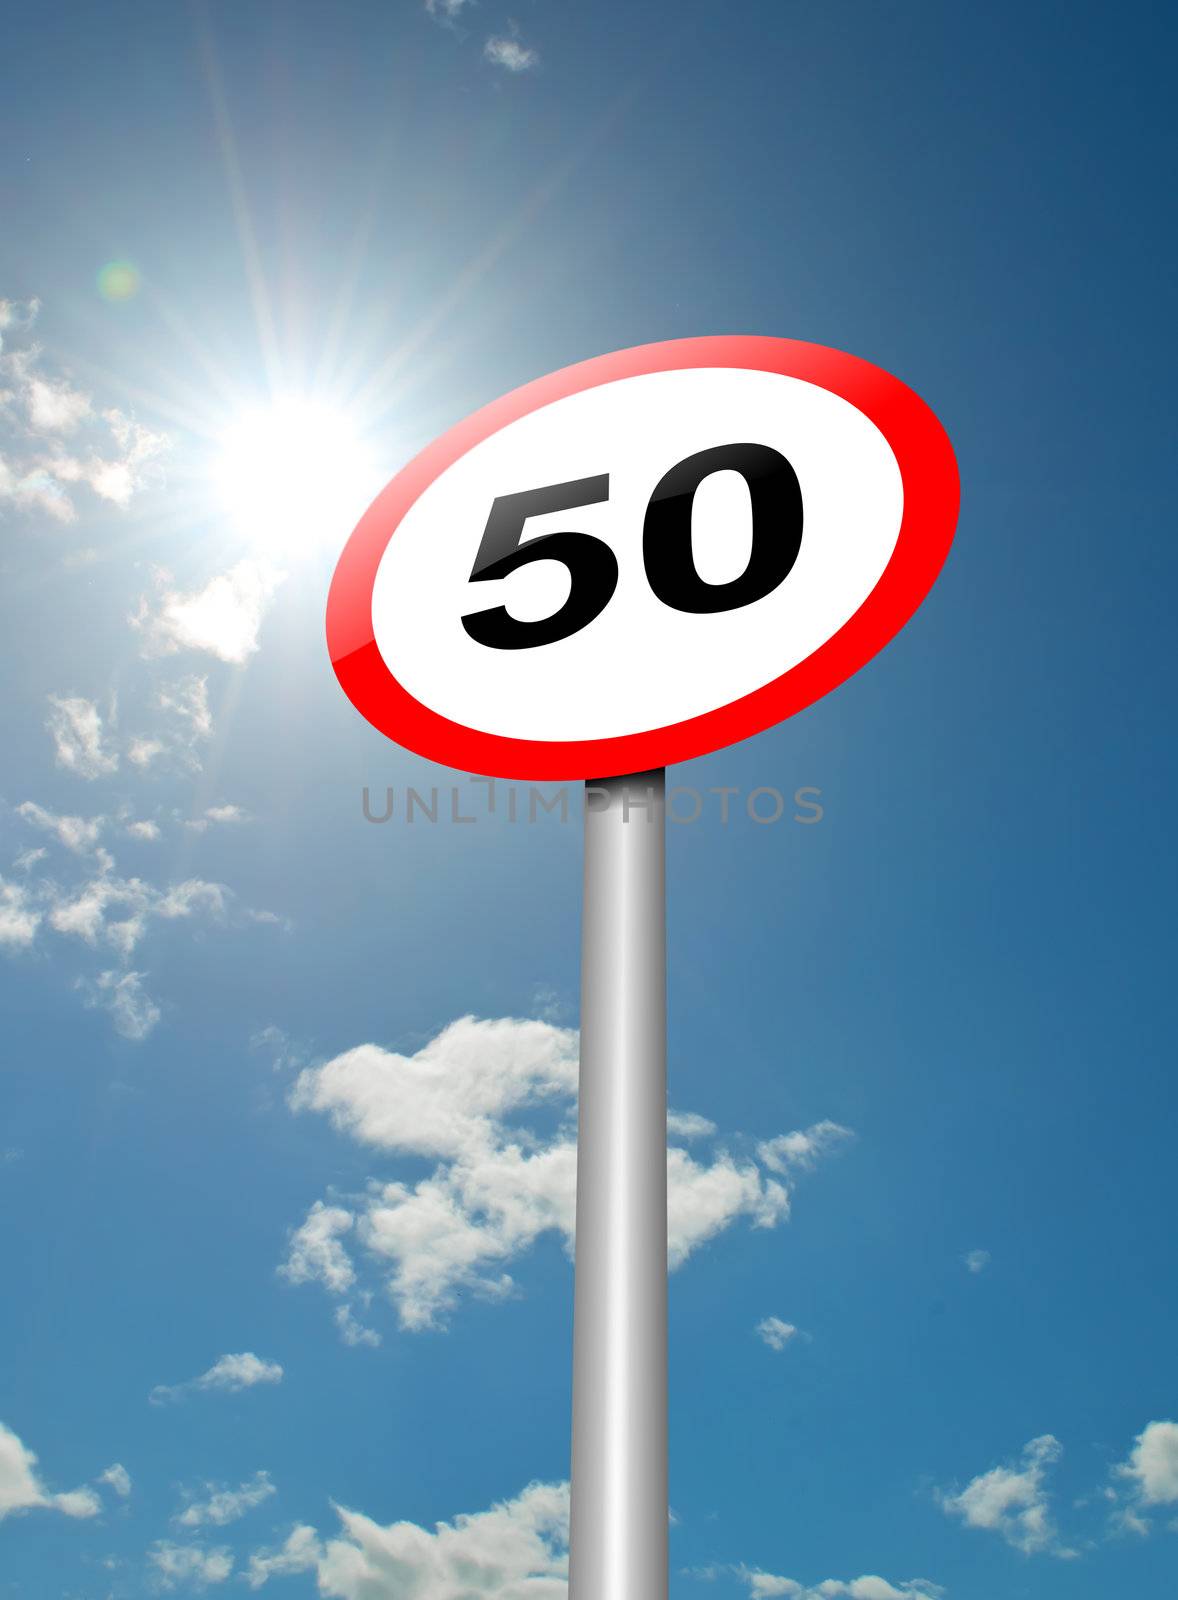 Illustration depicting a speed limit road sign against blue sky and sunlight background.